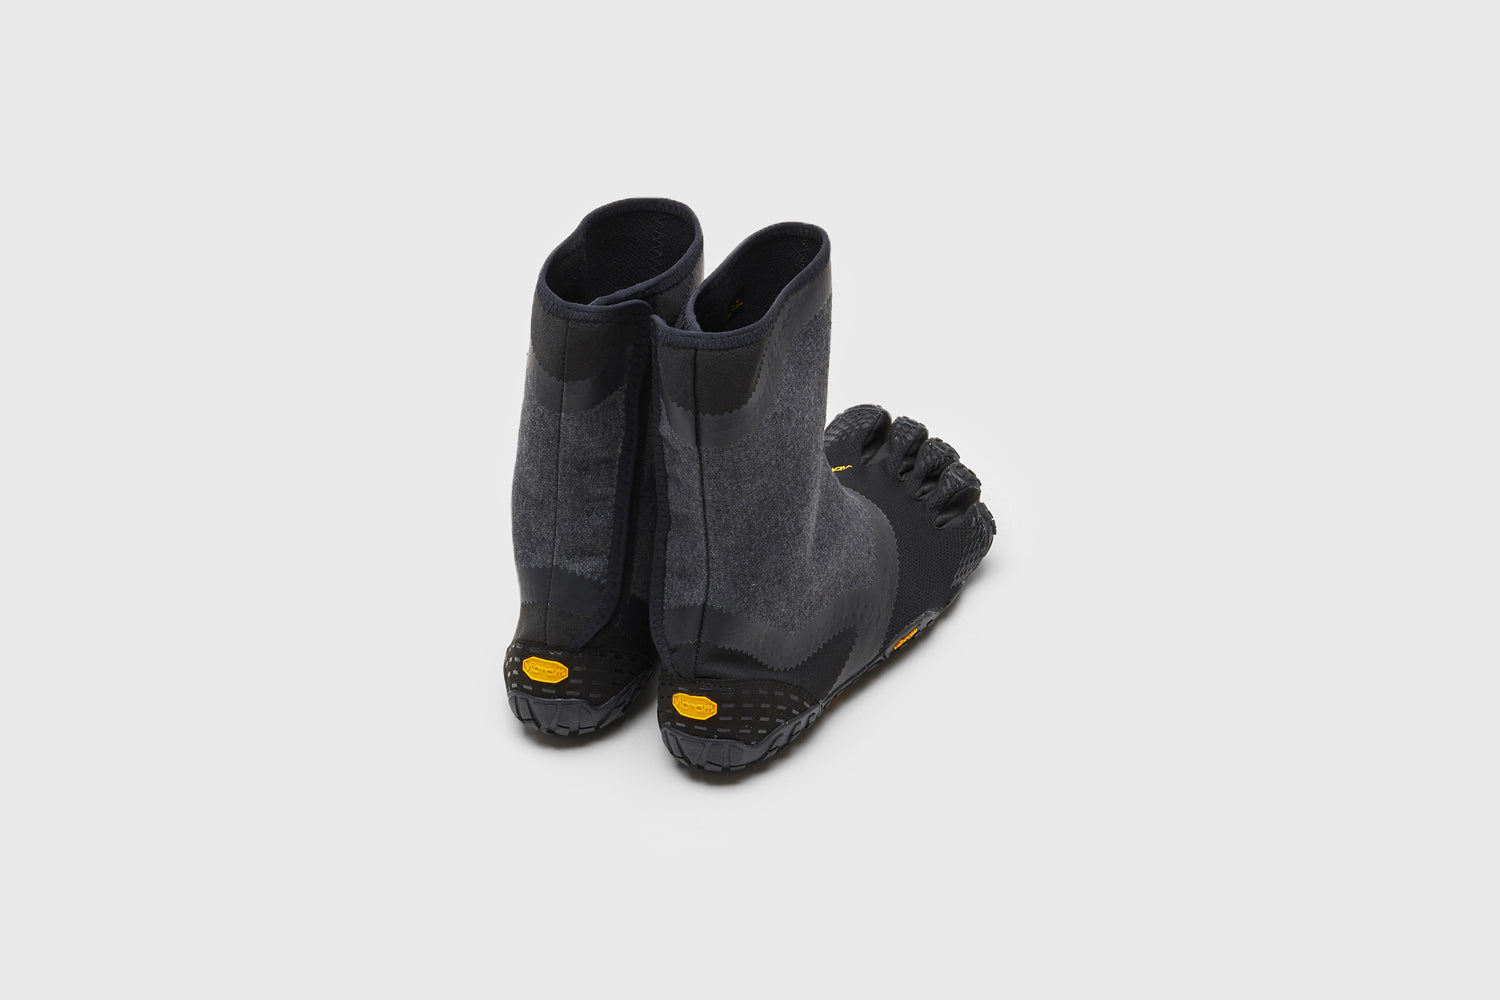 SUICOKE NIN-HI shoes with black nylon upper, black midsole and sole, strap and logo patch. From Spring/Summer 2023 collection on eightywingold Web Store, an official partner of SUICOKE. S20MHC BLACK